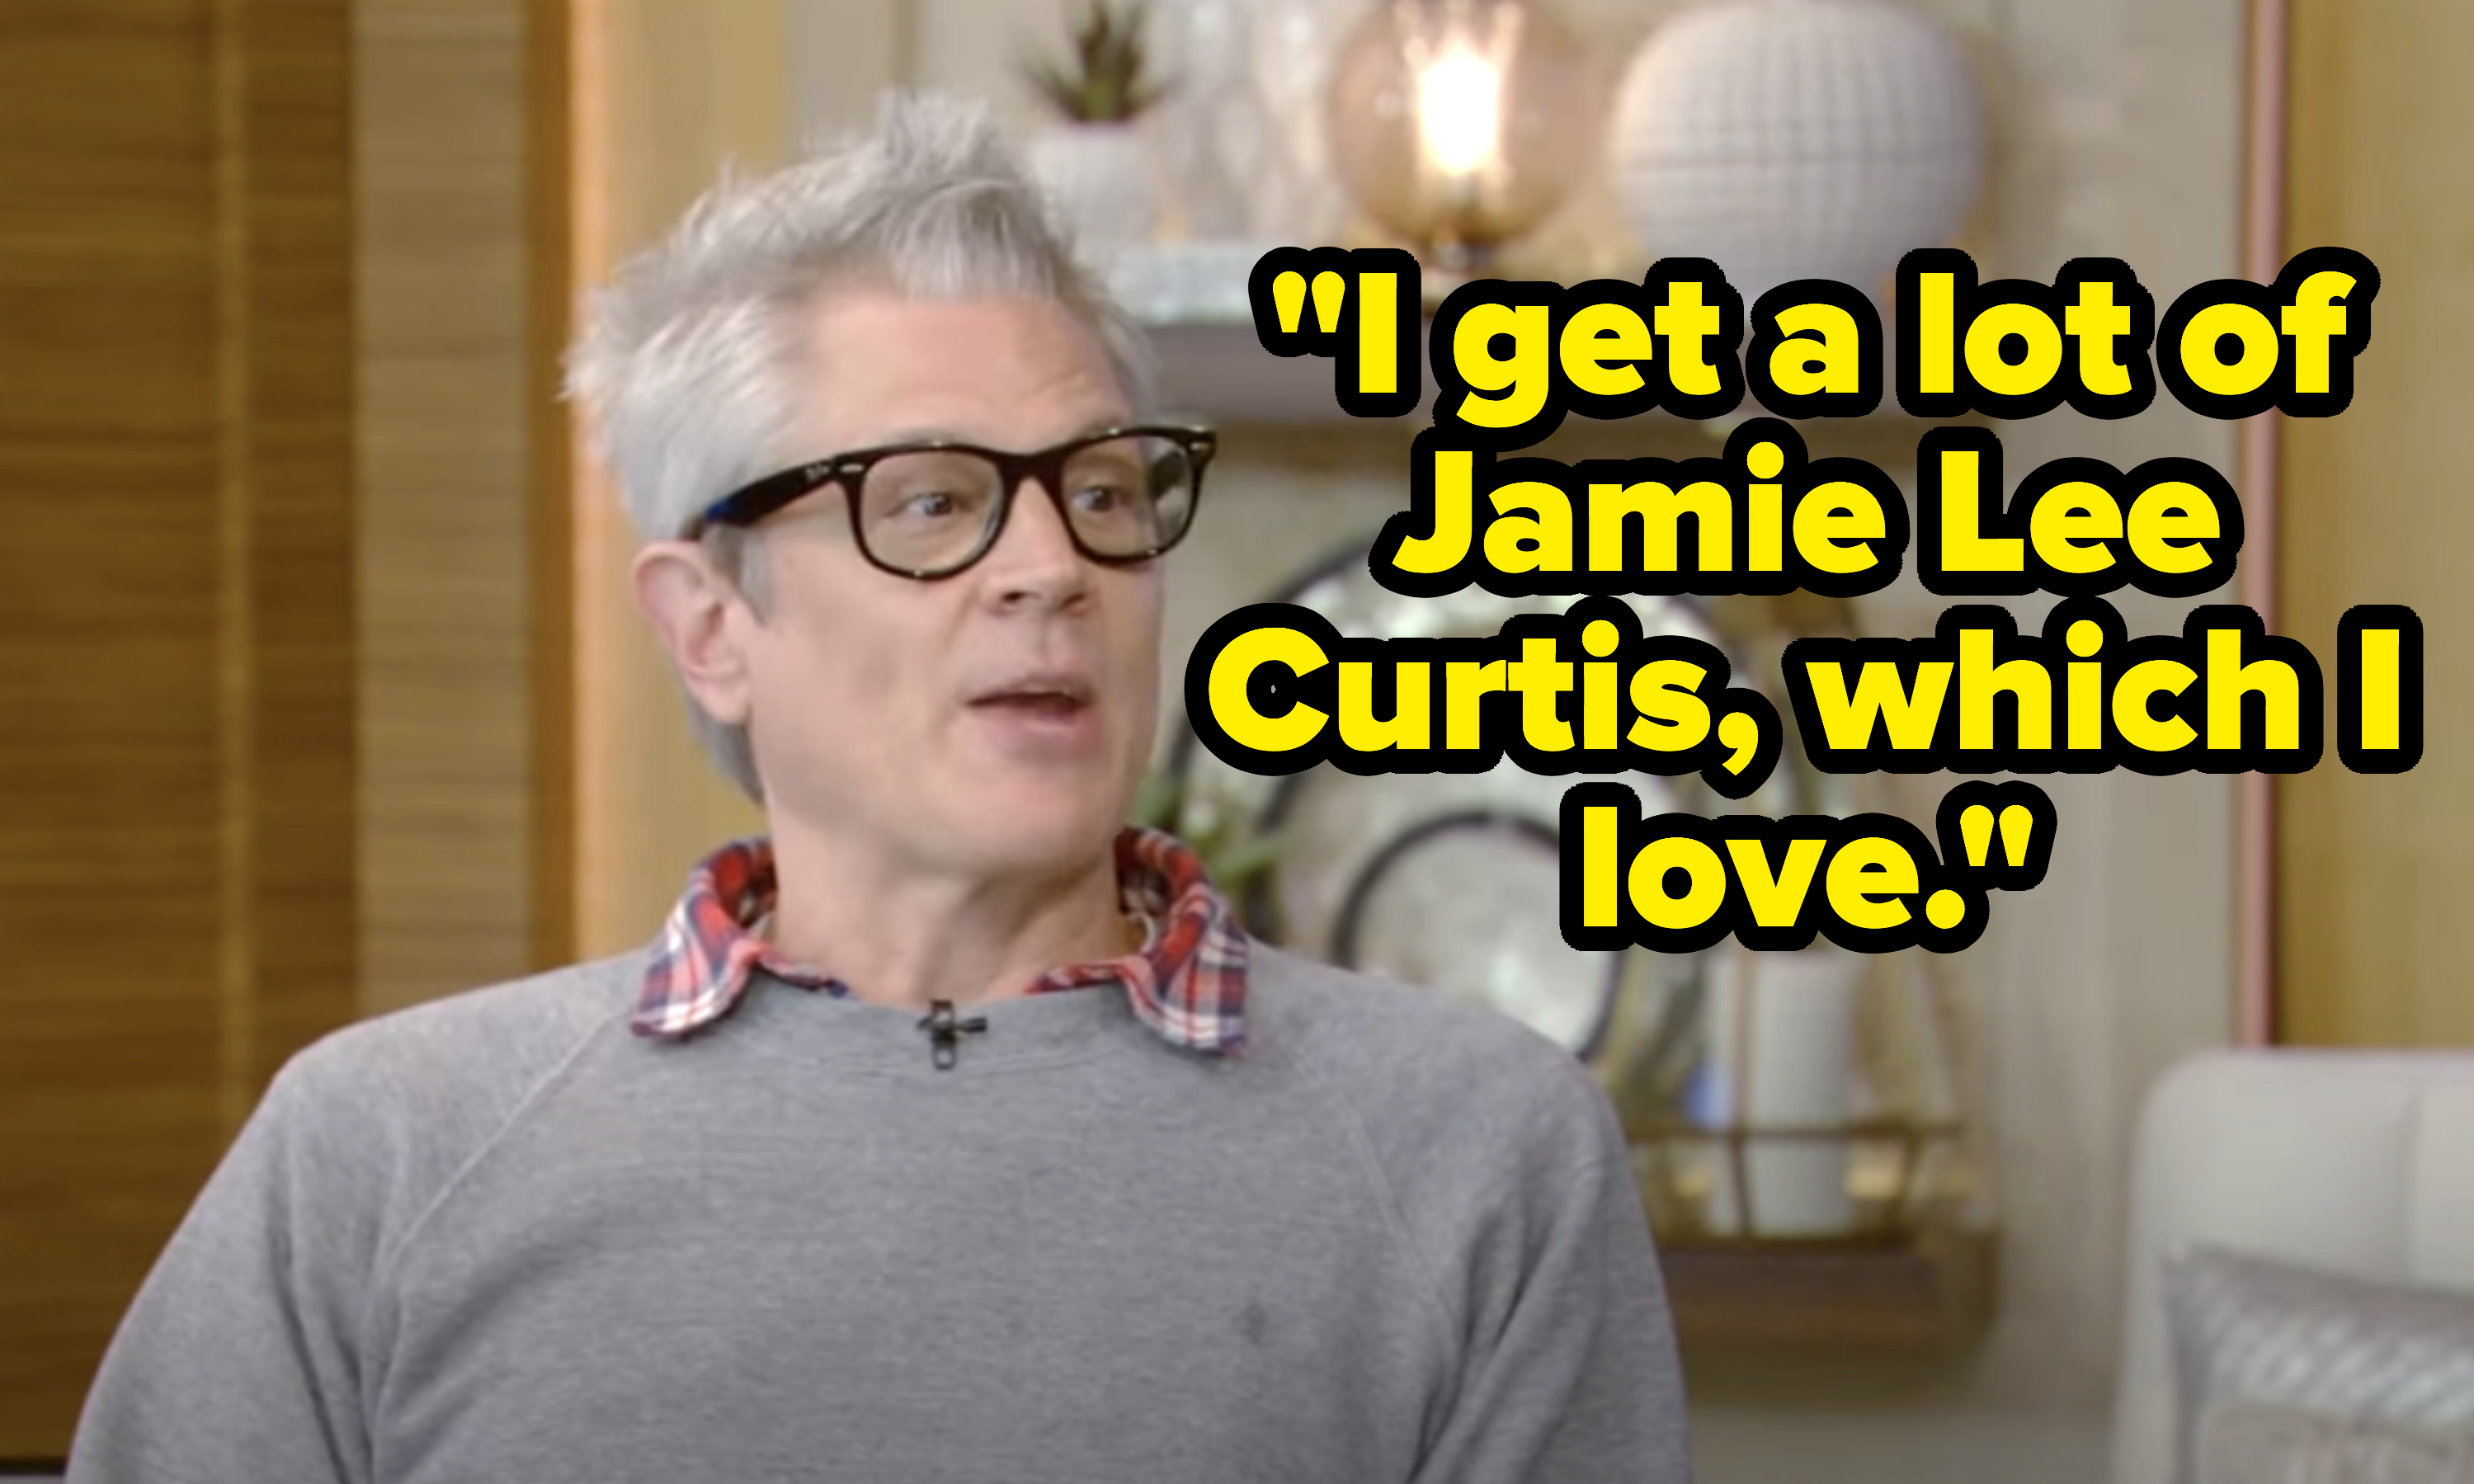 &quot;I get a lot of Jamie Lee Curtis, which I love.&quot;